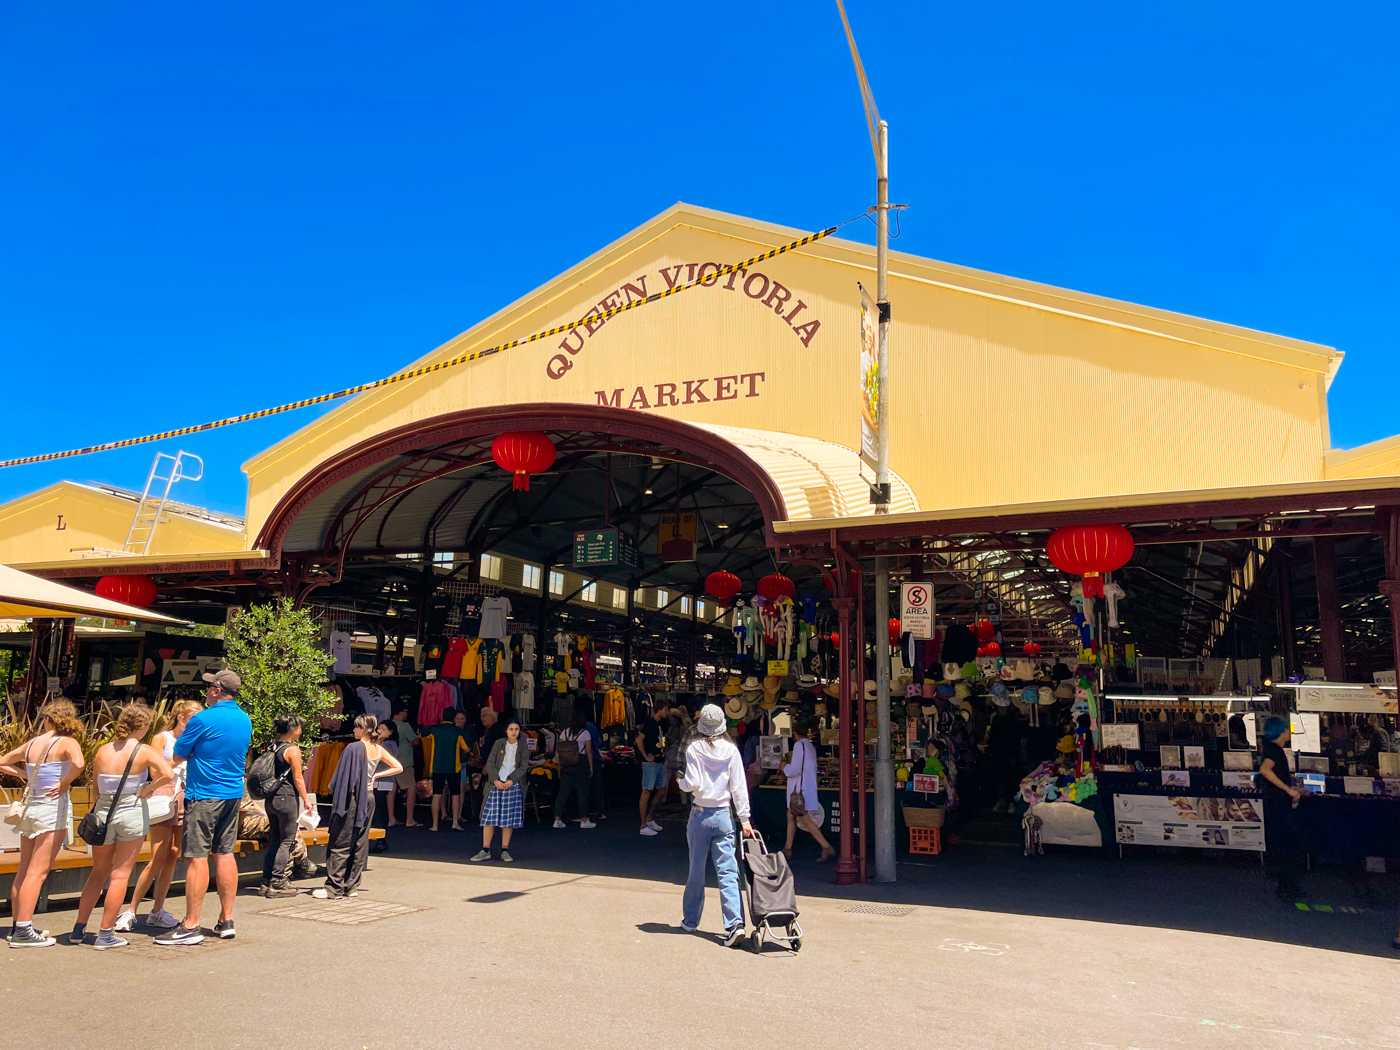 The back entrance to the Queen Victoria Market on a cloudless, sunny day. Groups of people are gathering around the open-air building and the interior is lined with clothing and souvenir stalls